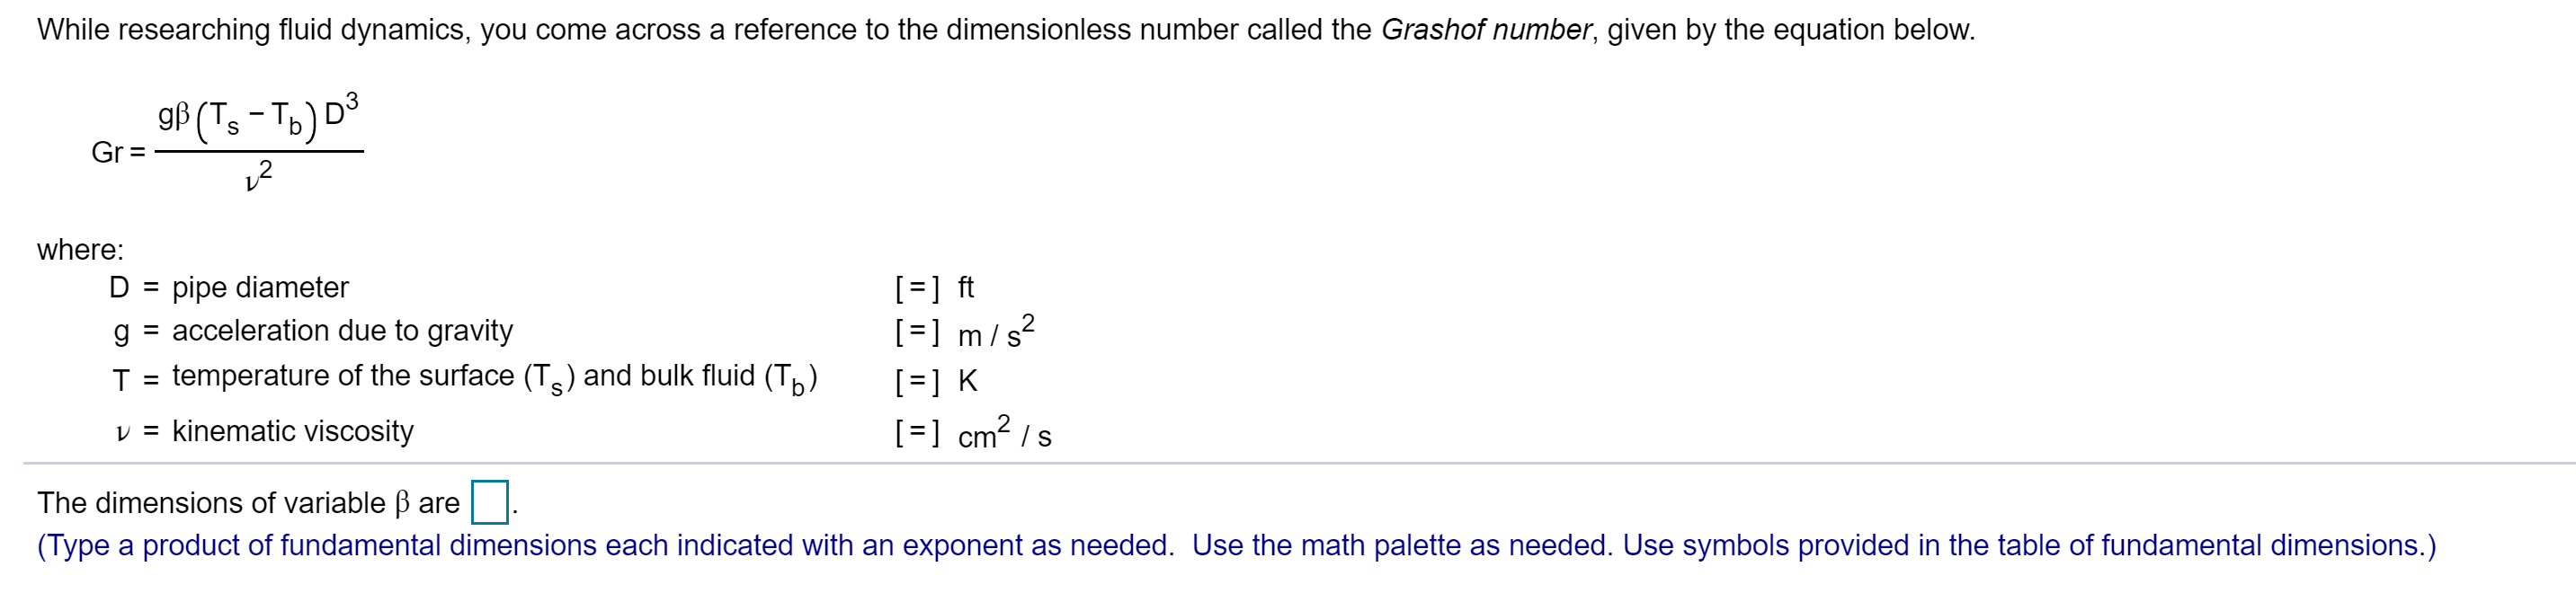 While researching fluid dynamics, you come across a reference to the dimensionless number called the Grashof number, given by the equation below.
gf (T,-To) D
S
Gr =
where:
] ft
]m/ s
D pipe diameter
acceleration due to gravity
g
temperature of the surface (Ts) and bulk fluid (T)
T
K
cm2 s
v = kinematic viscosity
The dimensions of variable B are
(Type a product of fundamental dimensions each indicated with an exponent as needed. Use the math palette as needed. Use symbols provided in the table of fundamental dimensions.)
